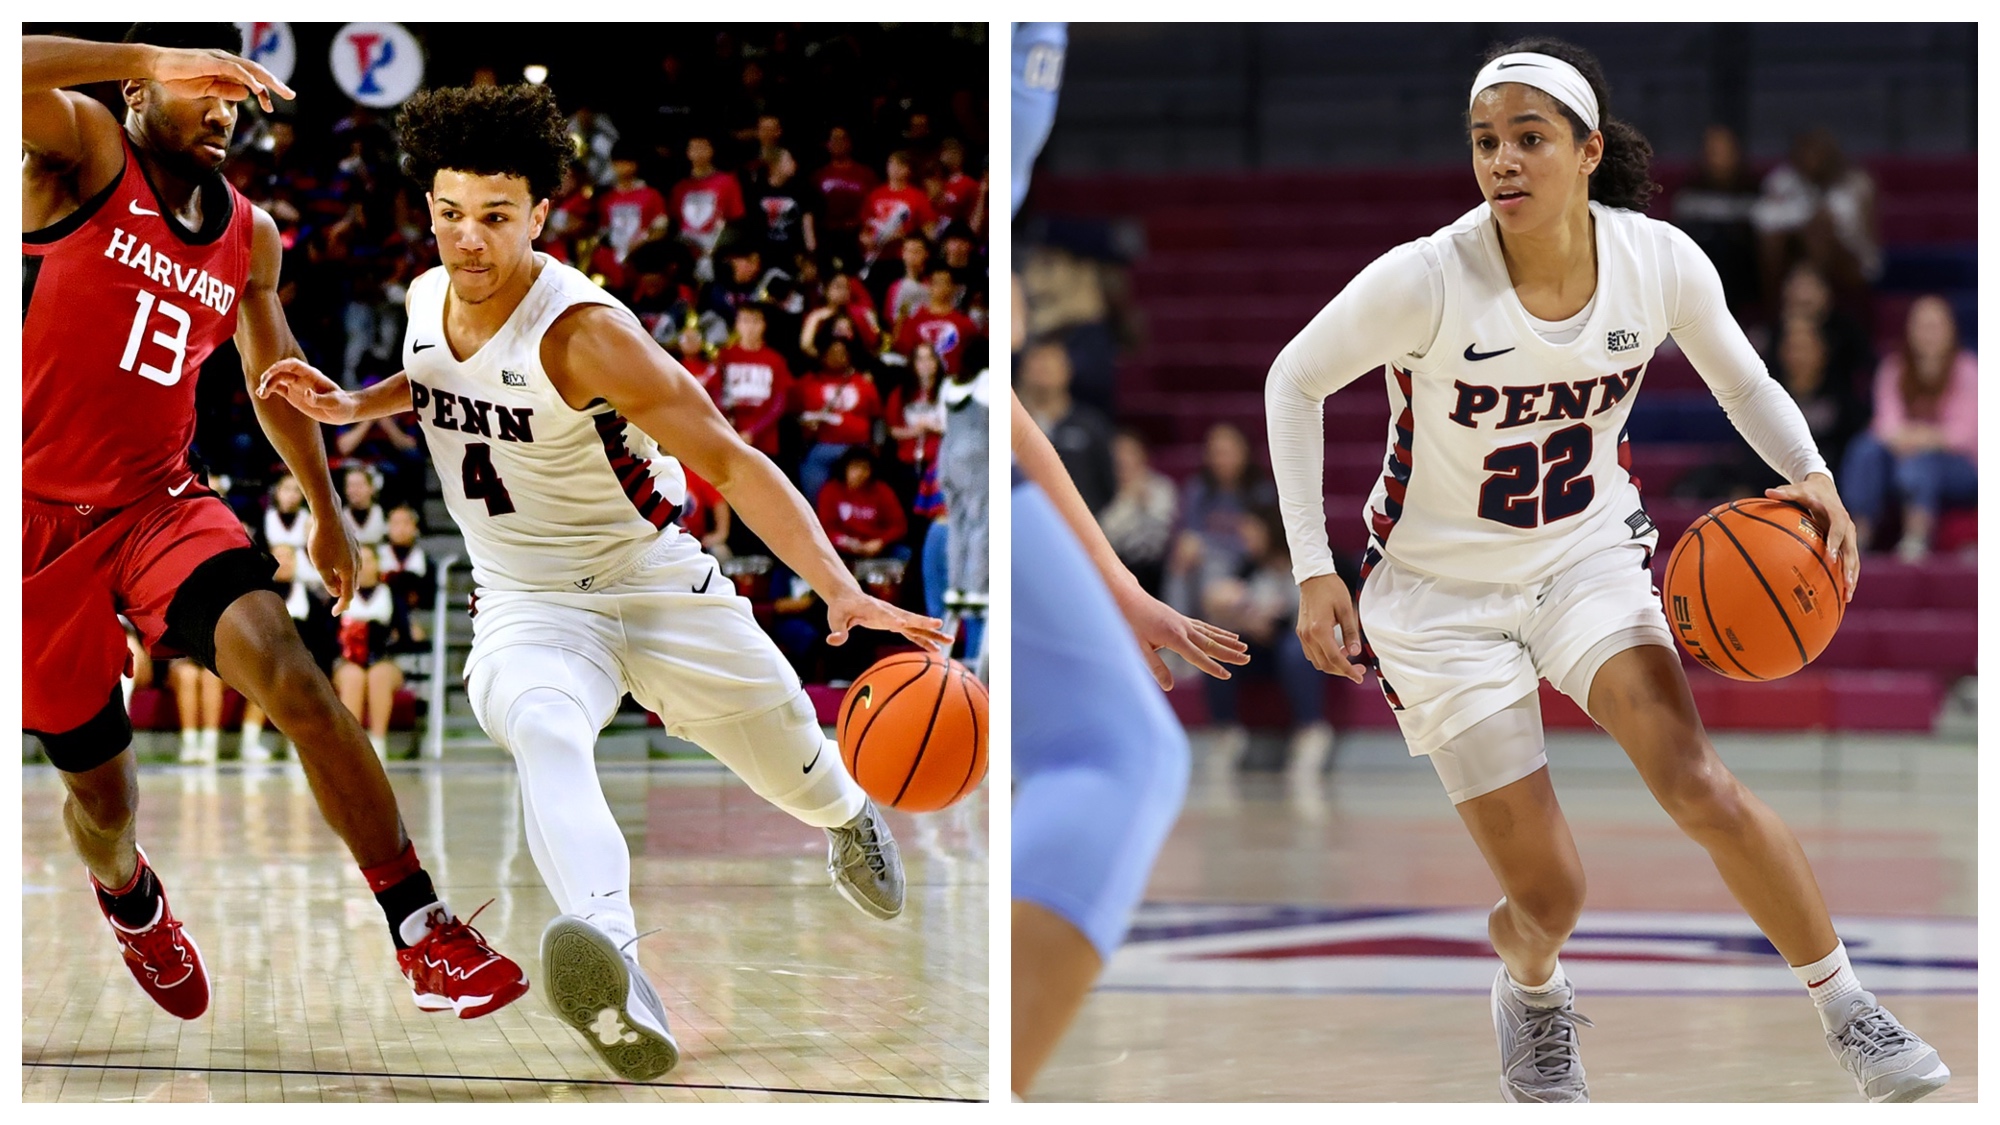 At left, Tyler Perkins dribbles to the basket against Harvard; at right, Mataya Gayle dribbles to the basket against Columbia.